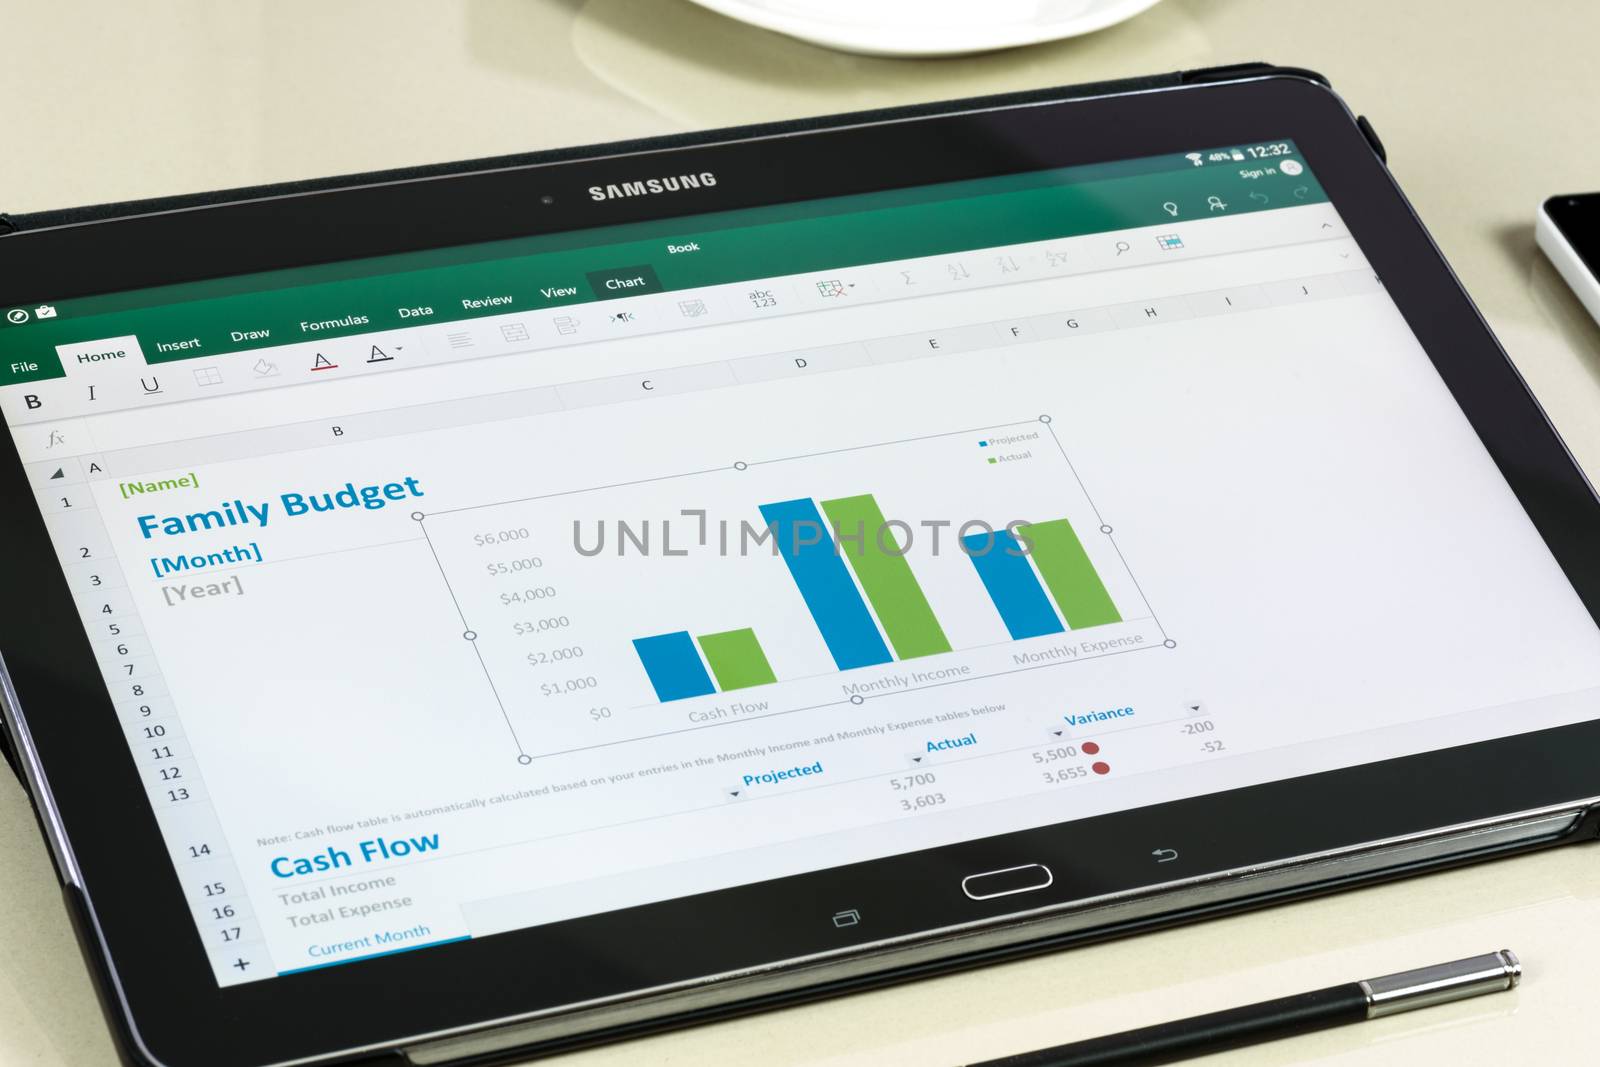 Microsoft Office Excel app on Samsung tablet by wdnet_studio